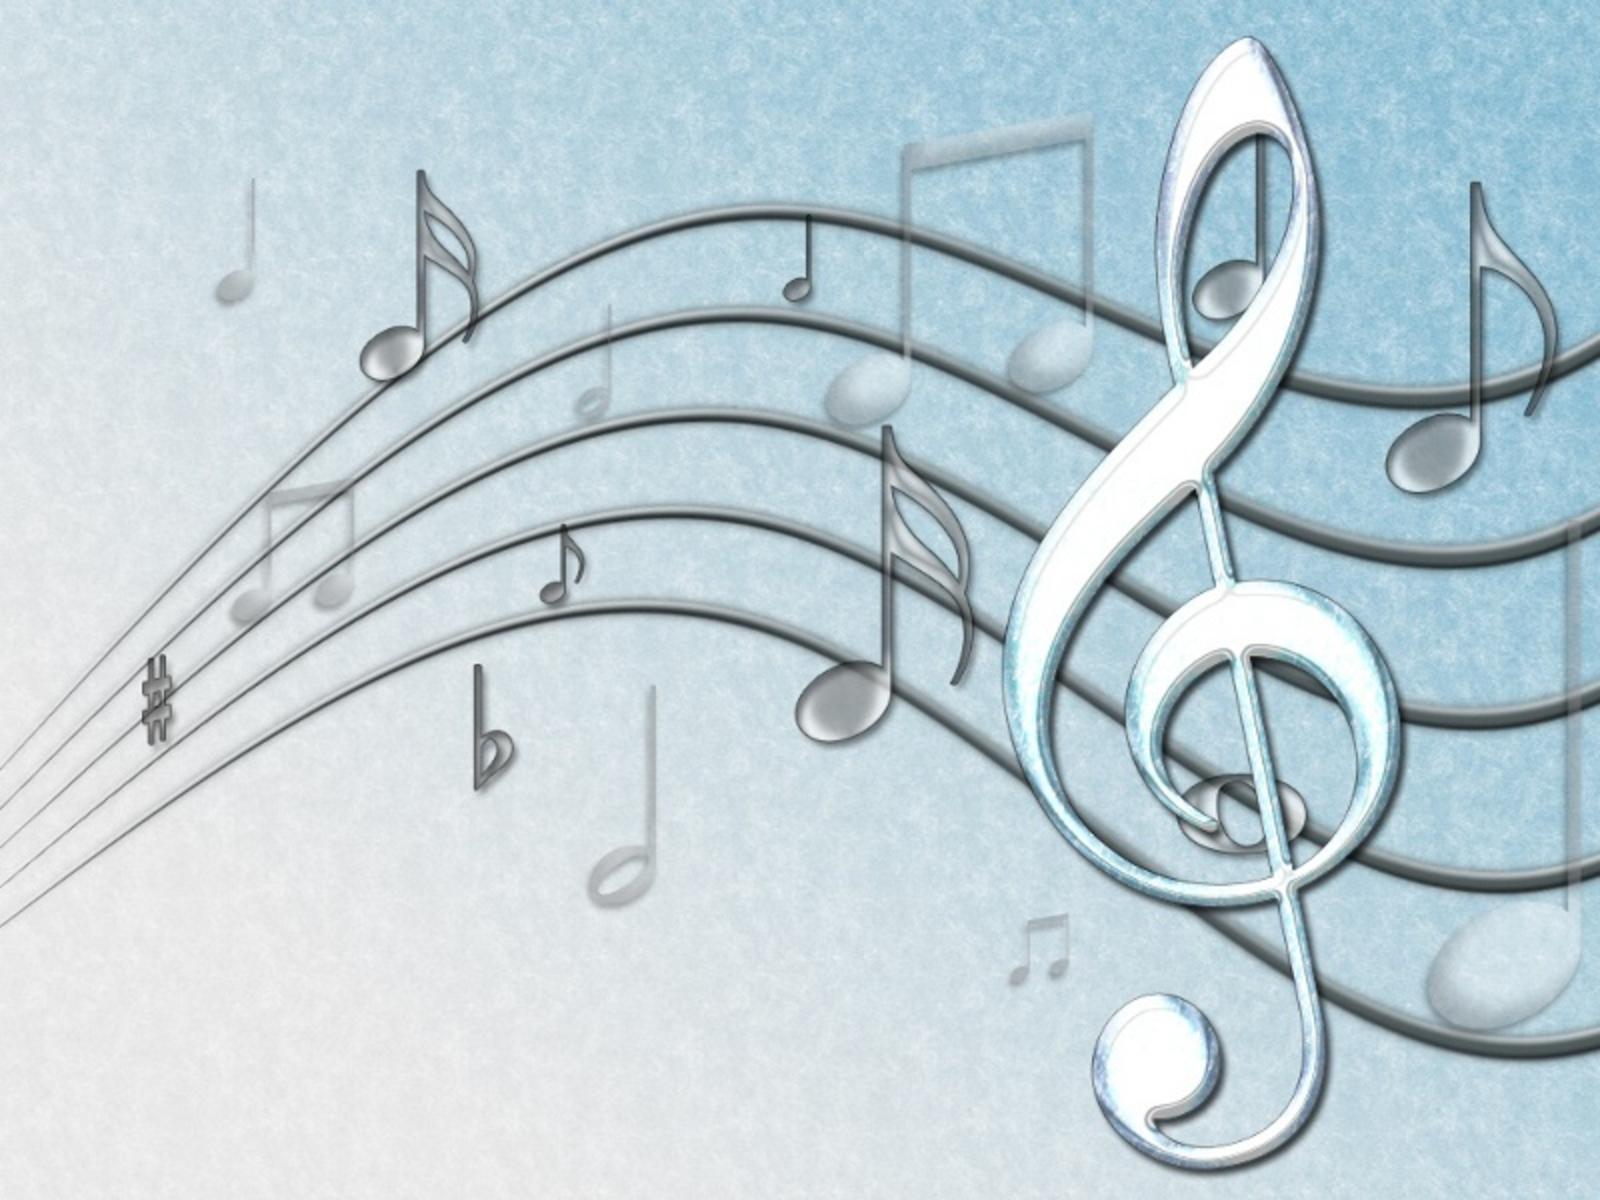 Musical Notes Wallpaper. Musical Notes Background